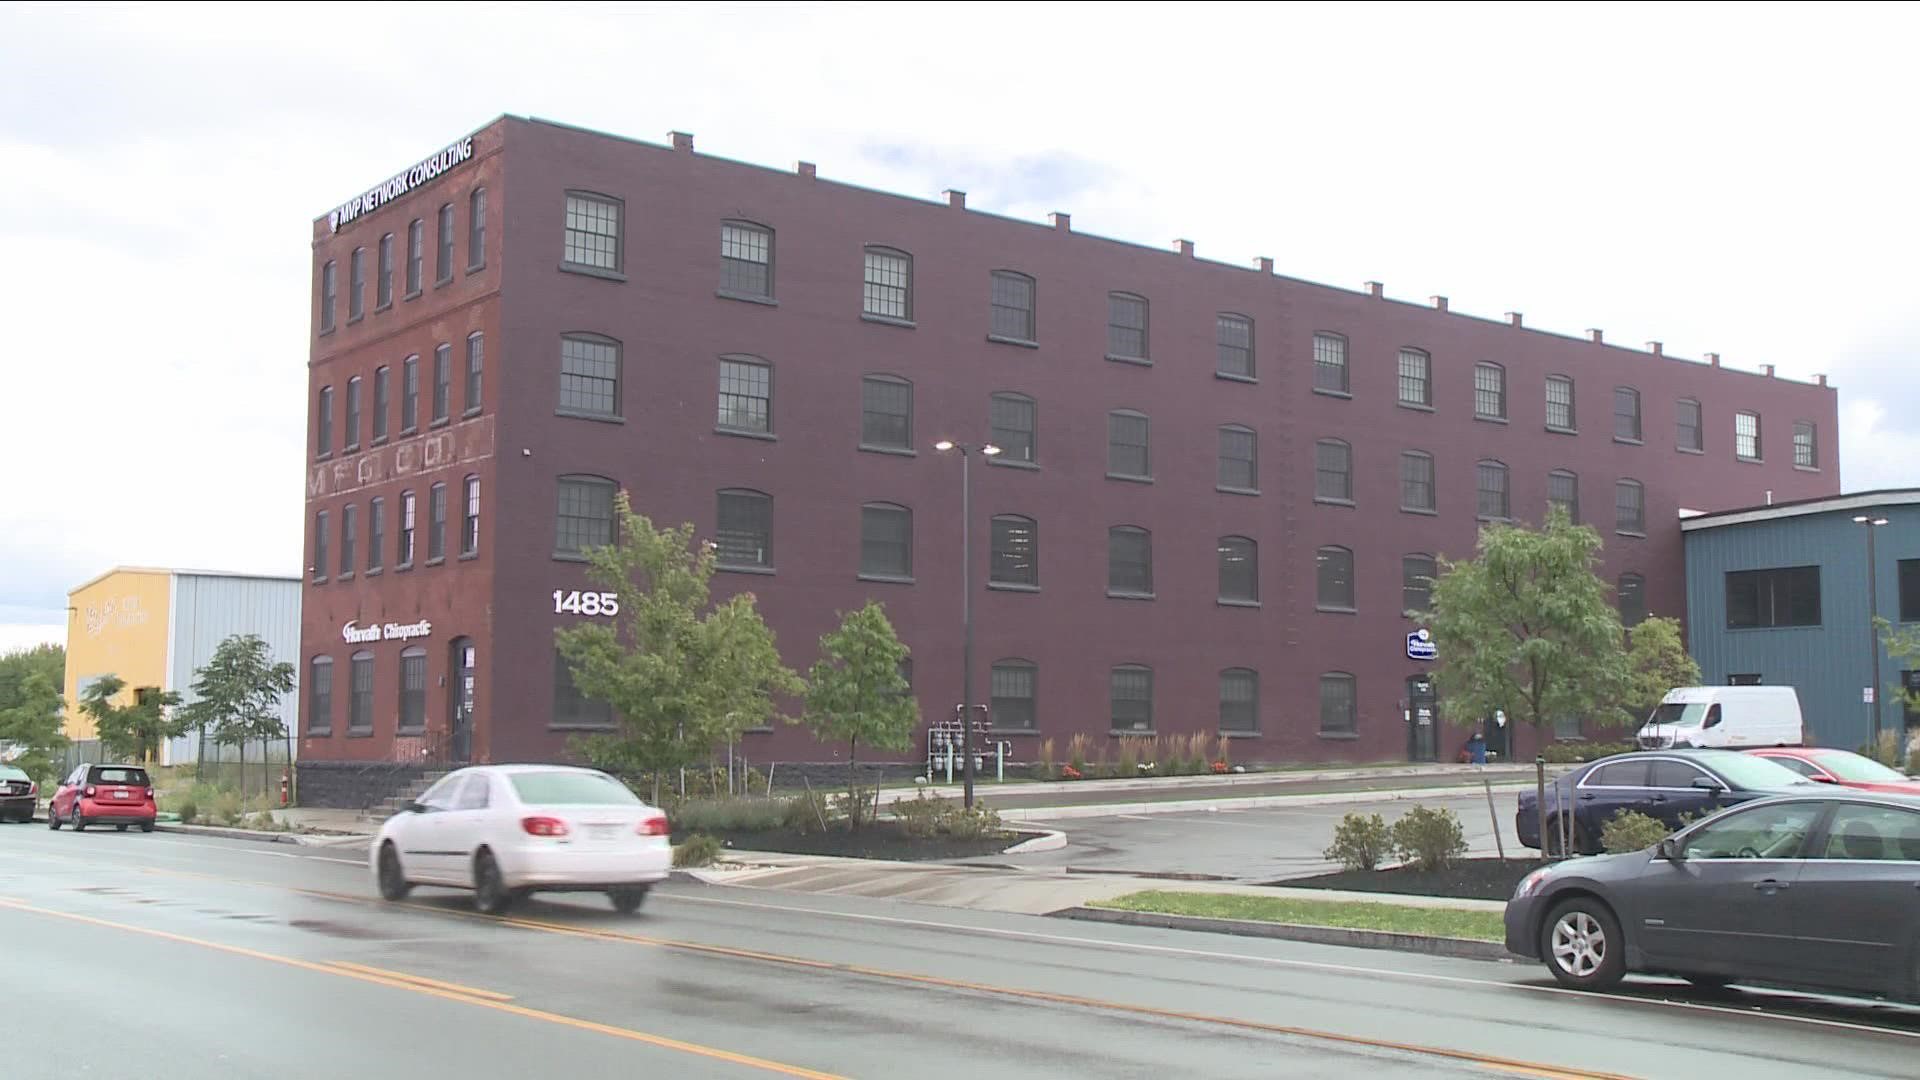 Developers continue to invest in former industrial and warehouse buildings, converting them into loft apartments, retail space, and restaurants